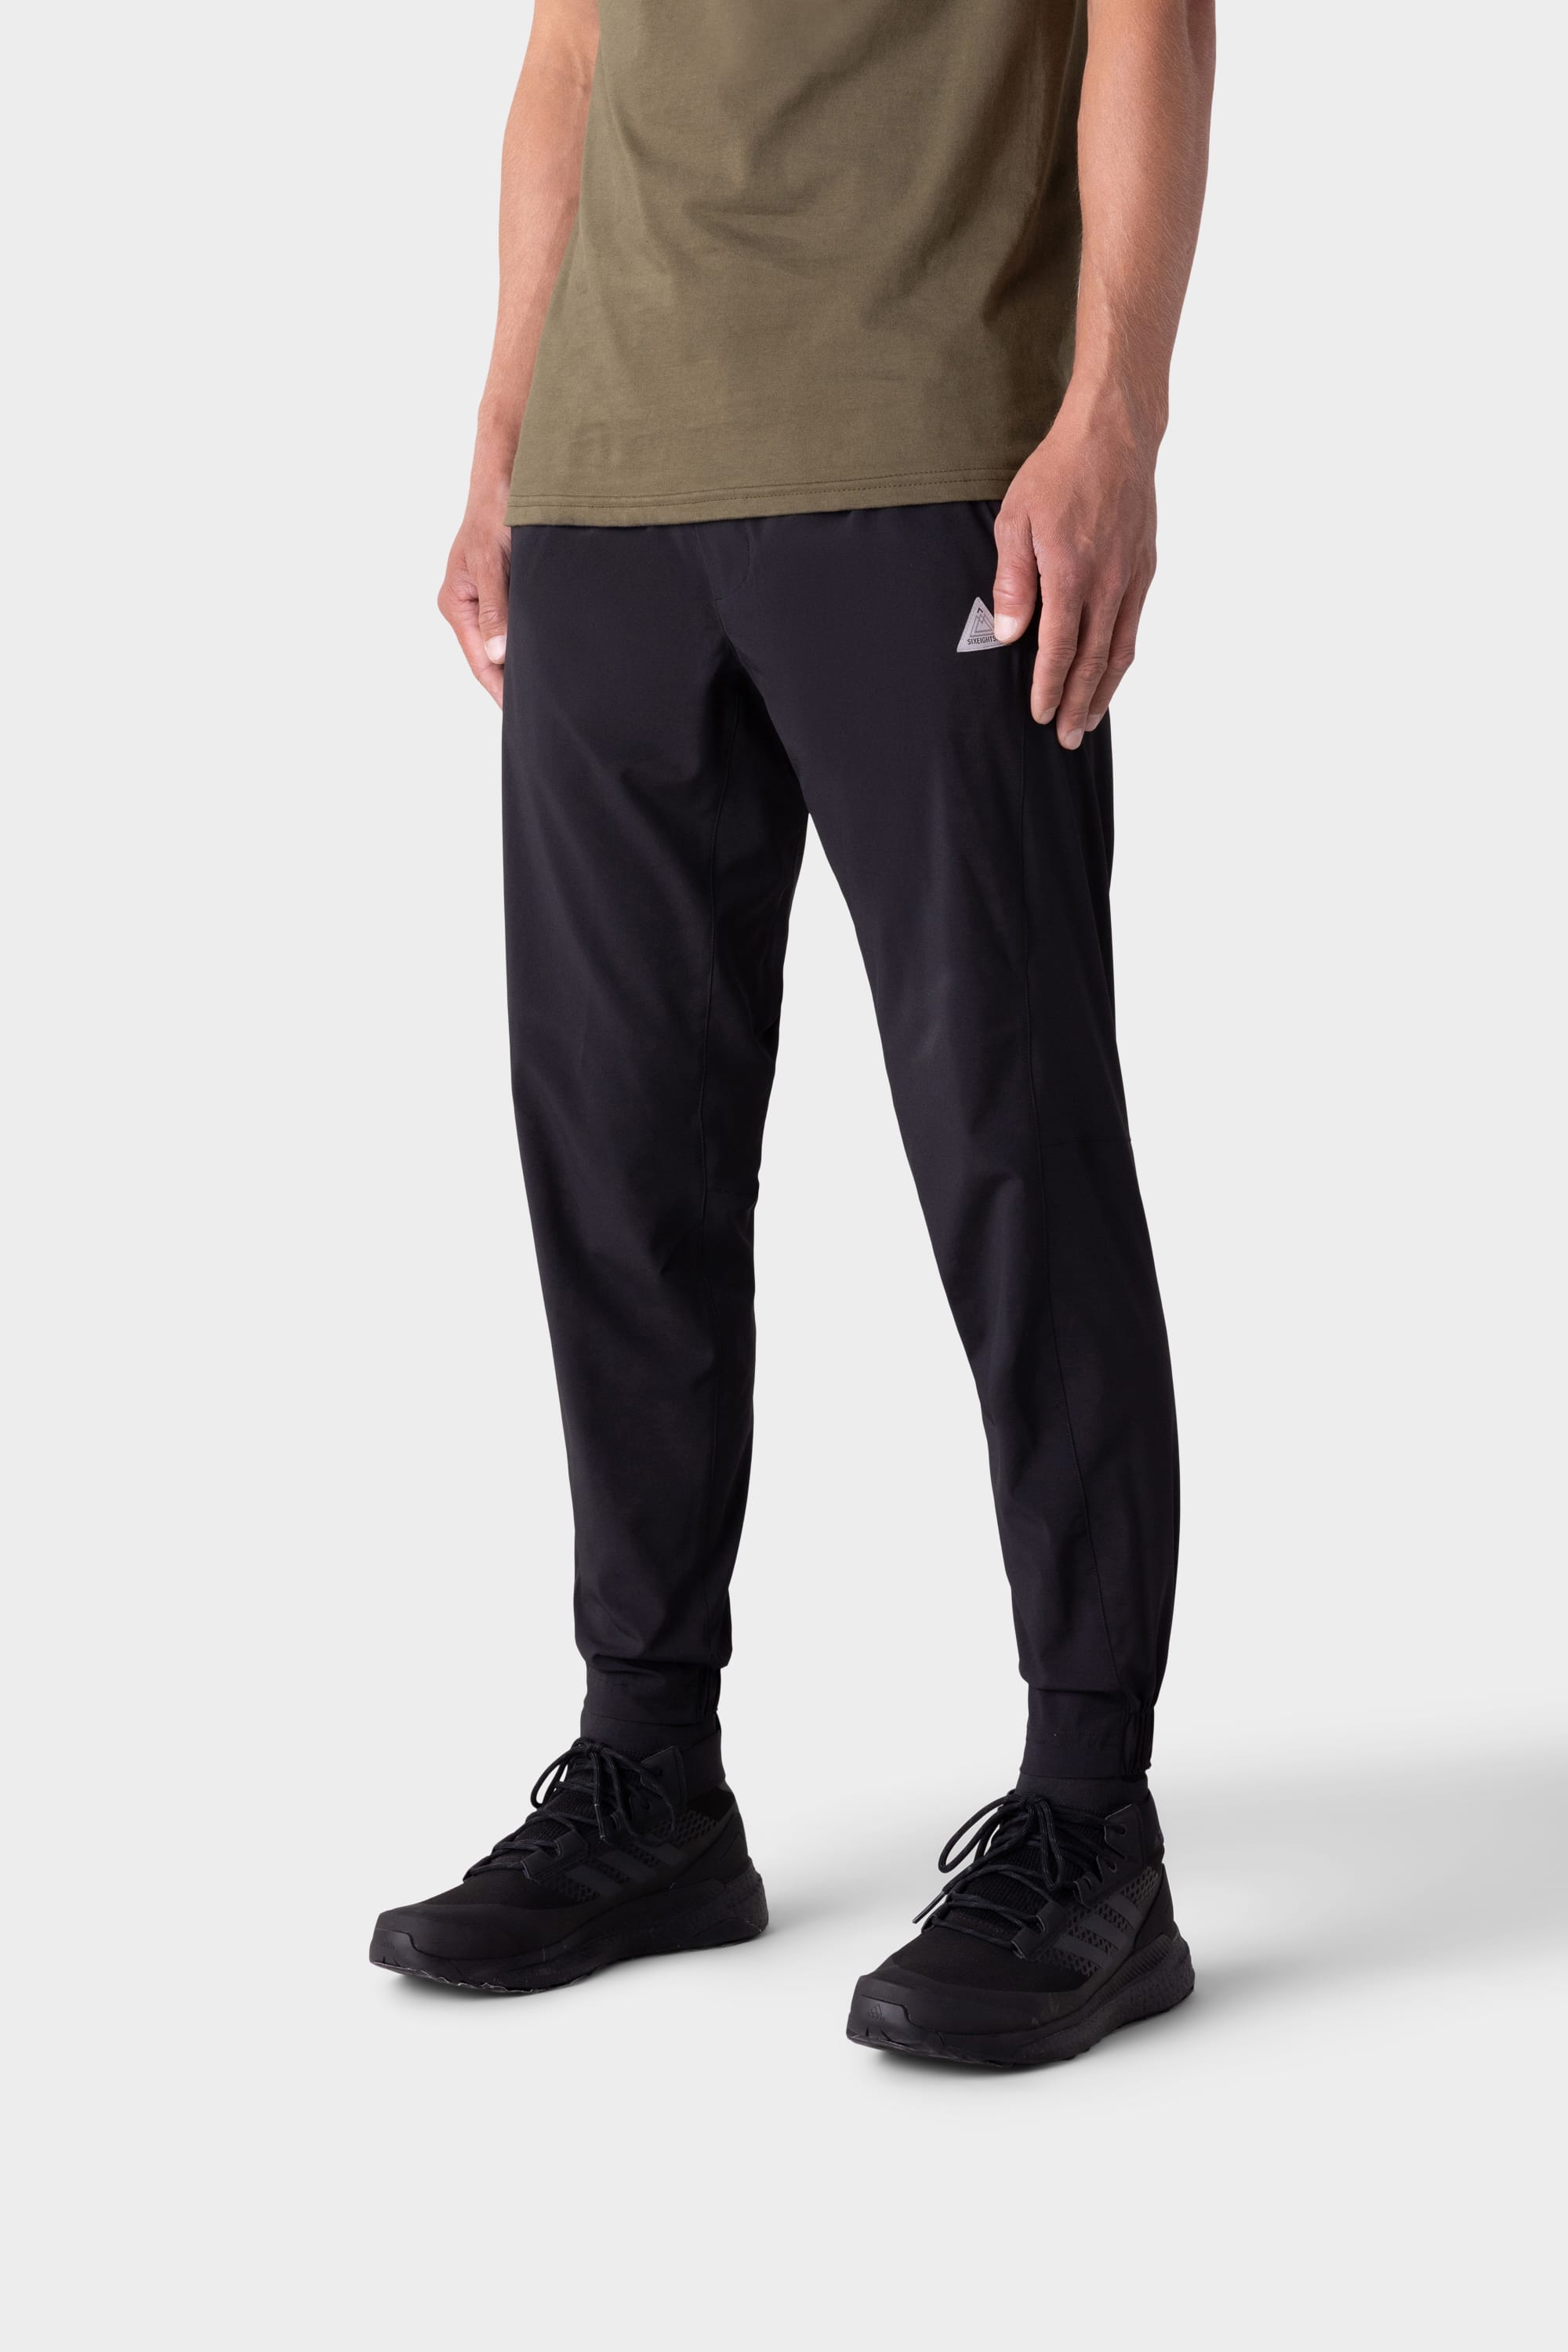 I.FIV5 Stretch Ripstop joggers in Grey for Men